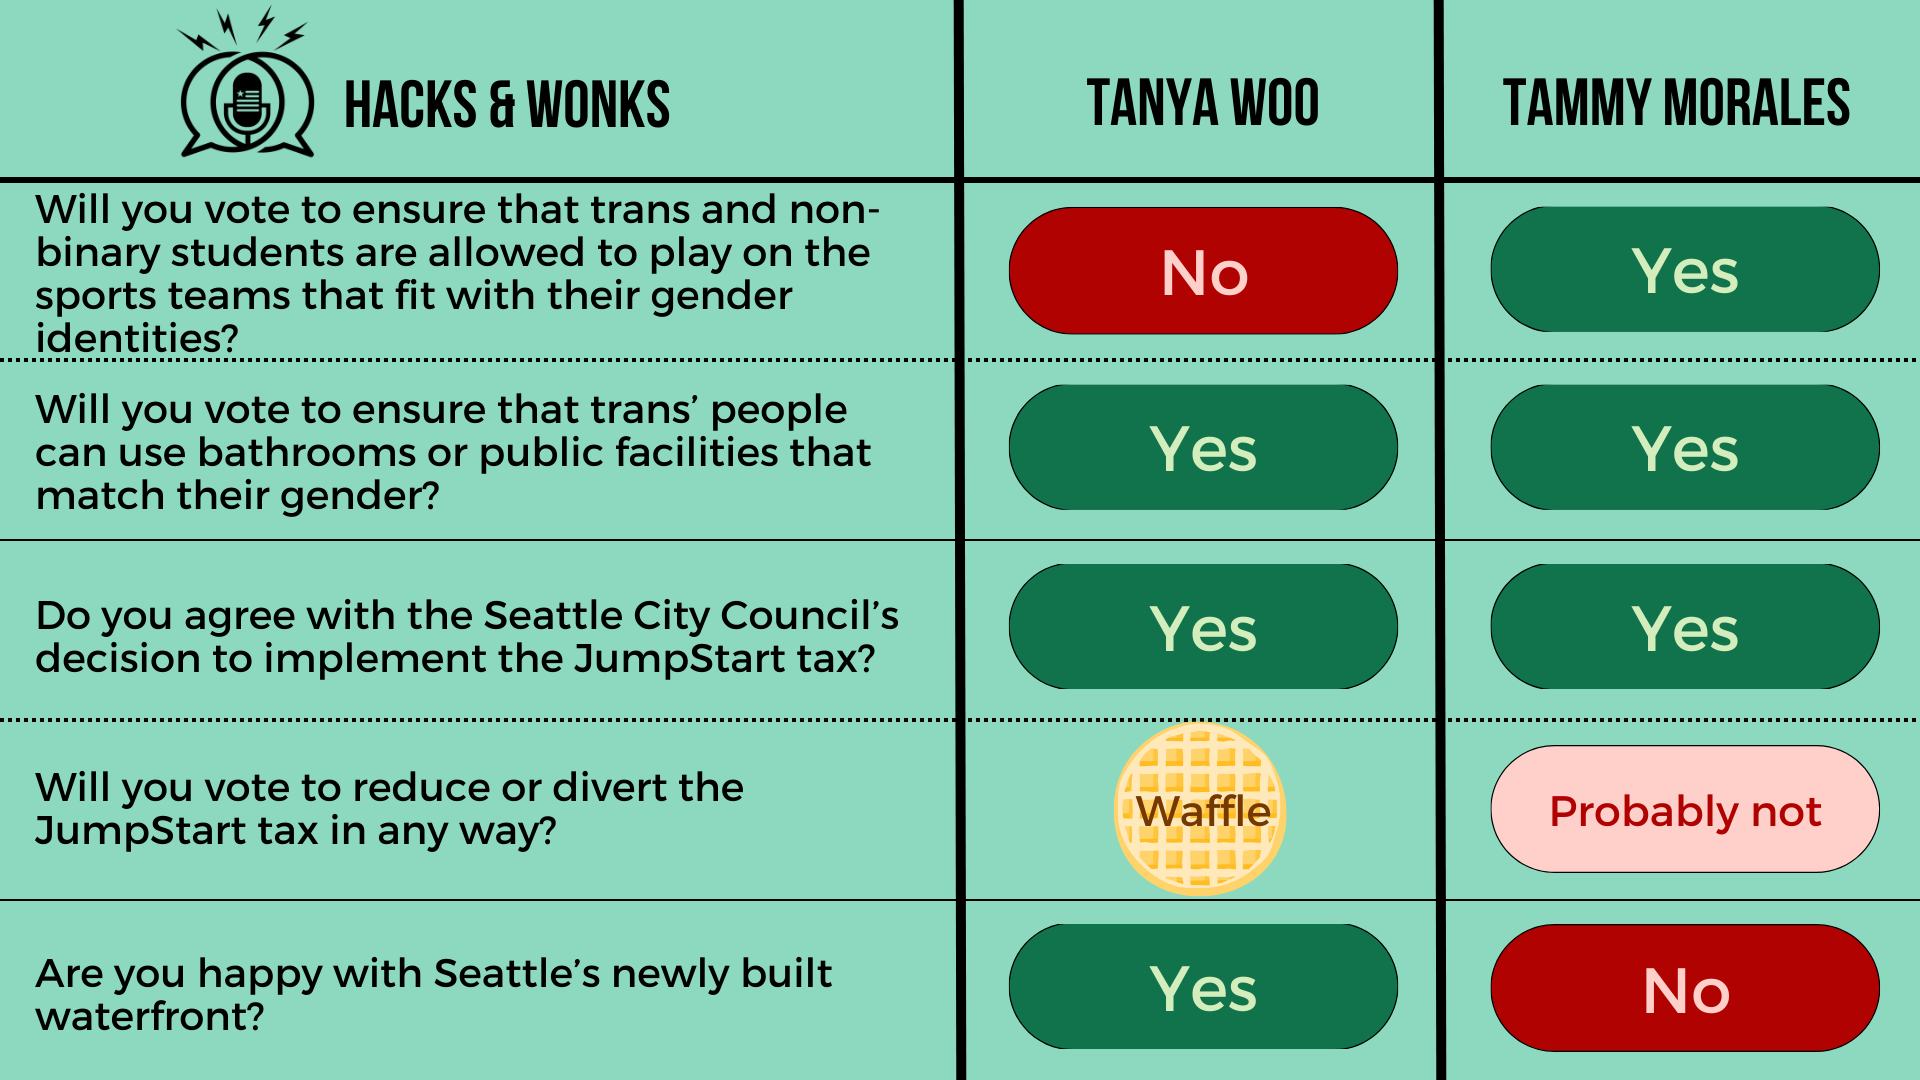 Q: Will you vote to ensure that trans and non-binary students are allowed to play on the sports teams that fit with their gender identities? Tanya Woo: No, Tammy Morales: Yes  Q: Will you vote to ensure that trans’ people can use bathrooms or public